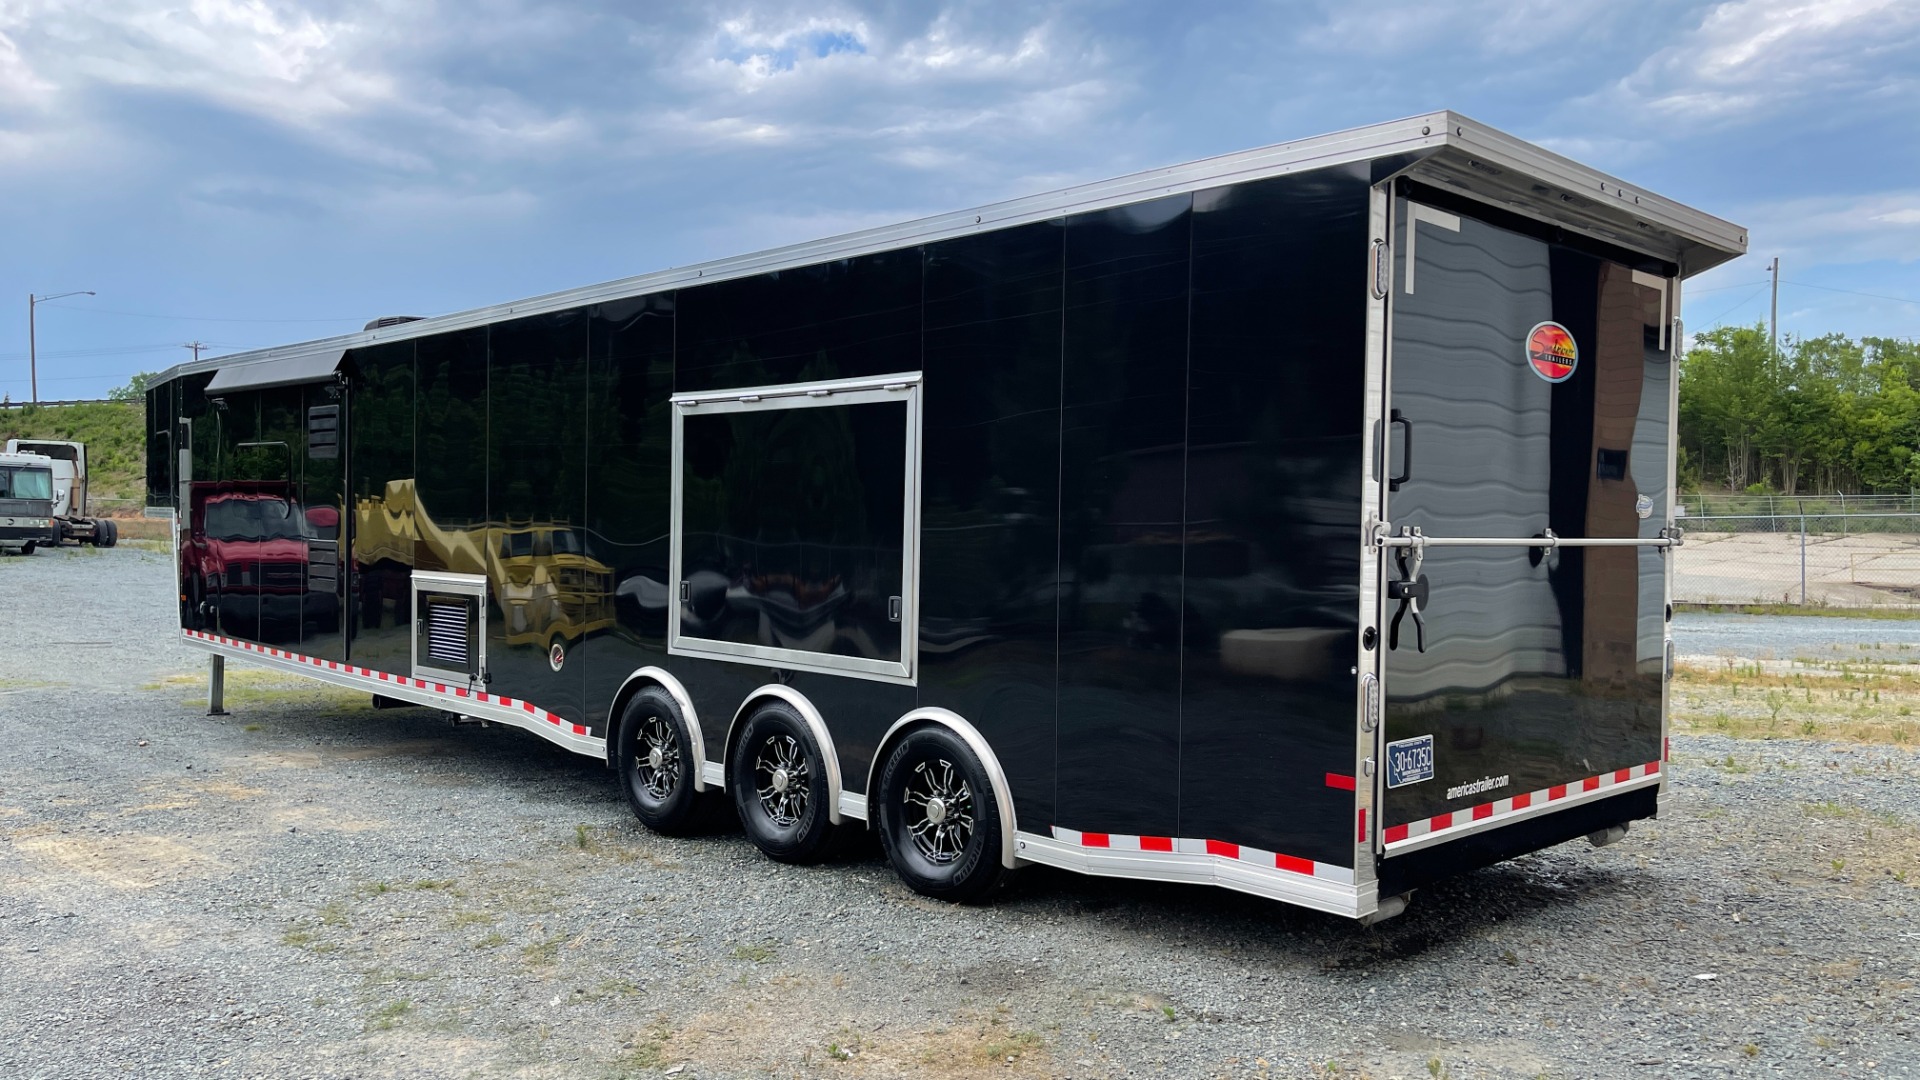 Used 2020 Sundowner 2986 SGM TOY HAULER 49FT / 29FT LIVING / 20FT FOR TOYS / TRIPLE-AXLE for sale $135,000 at Formula Imports in Charlotte NC 28227 3